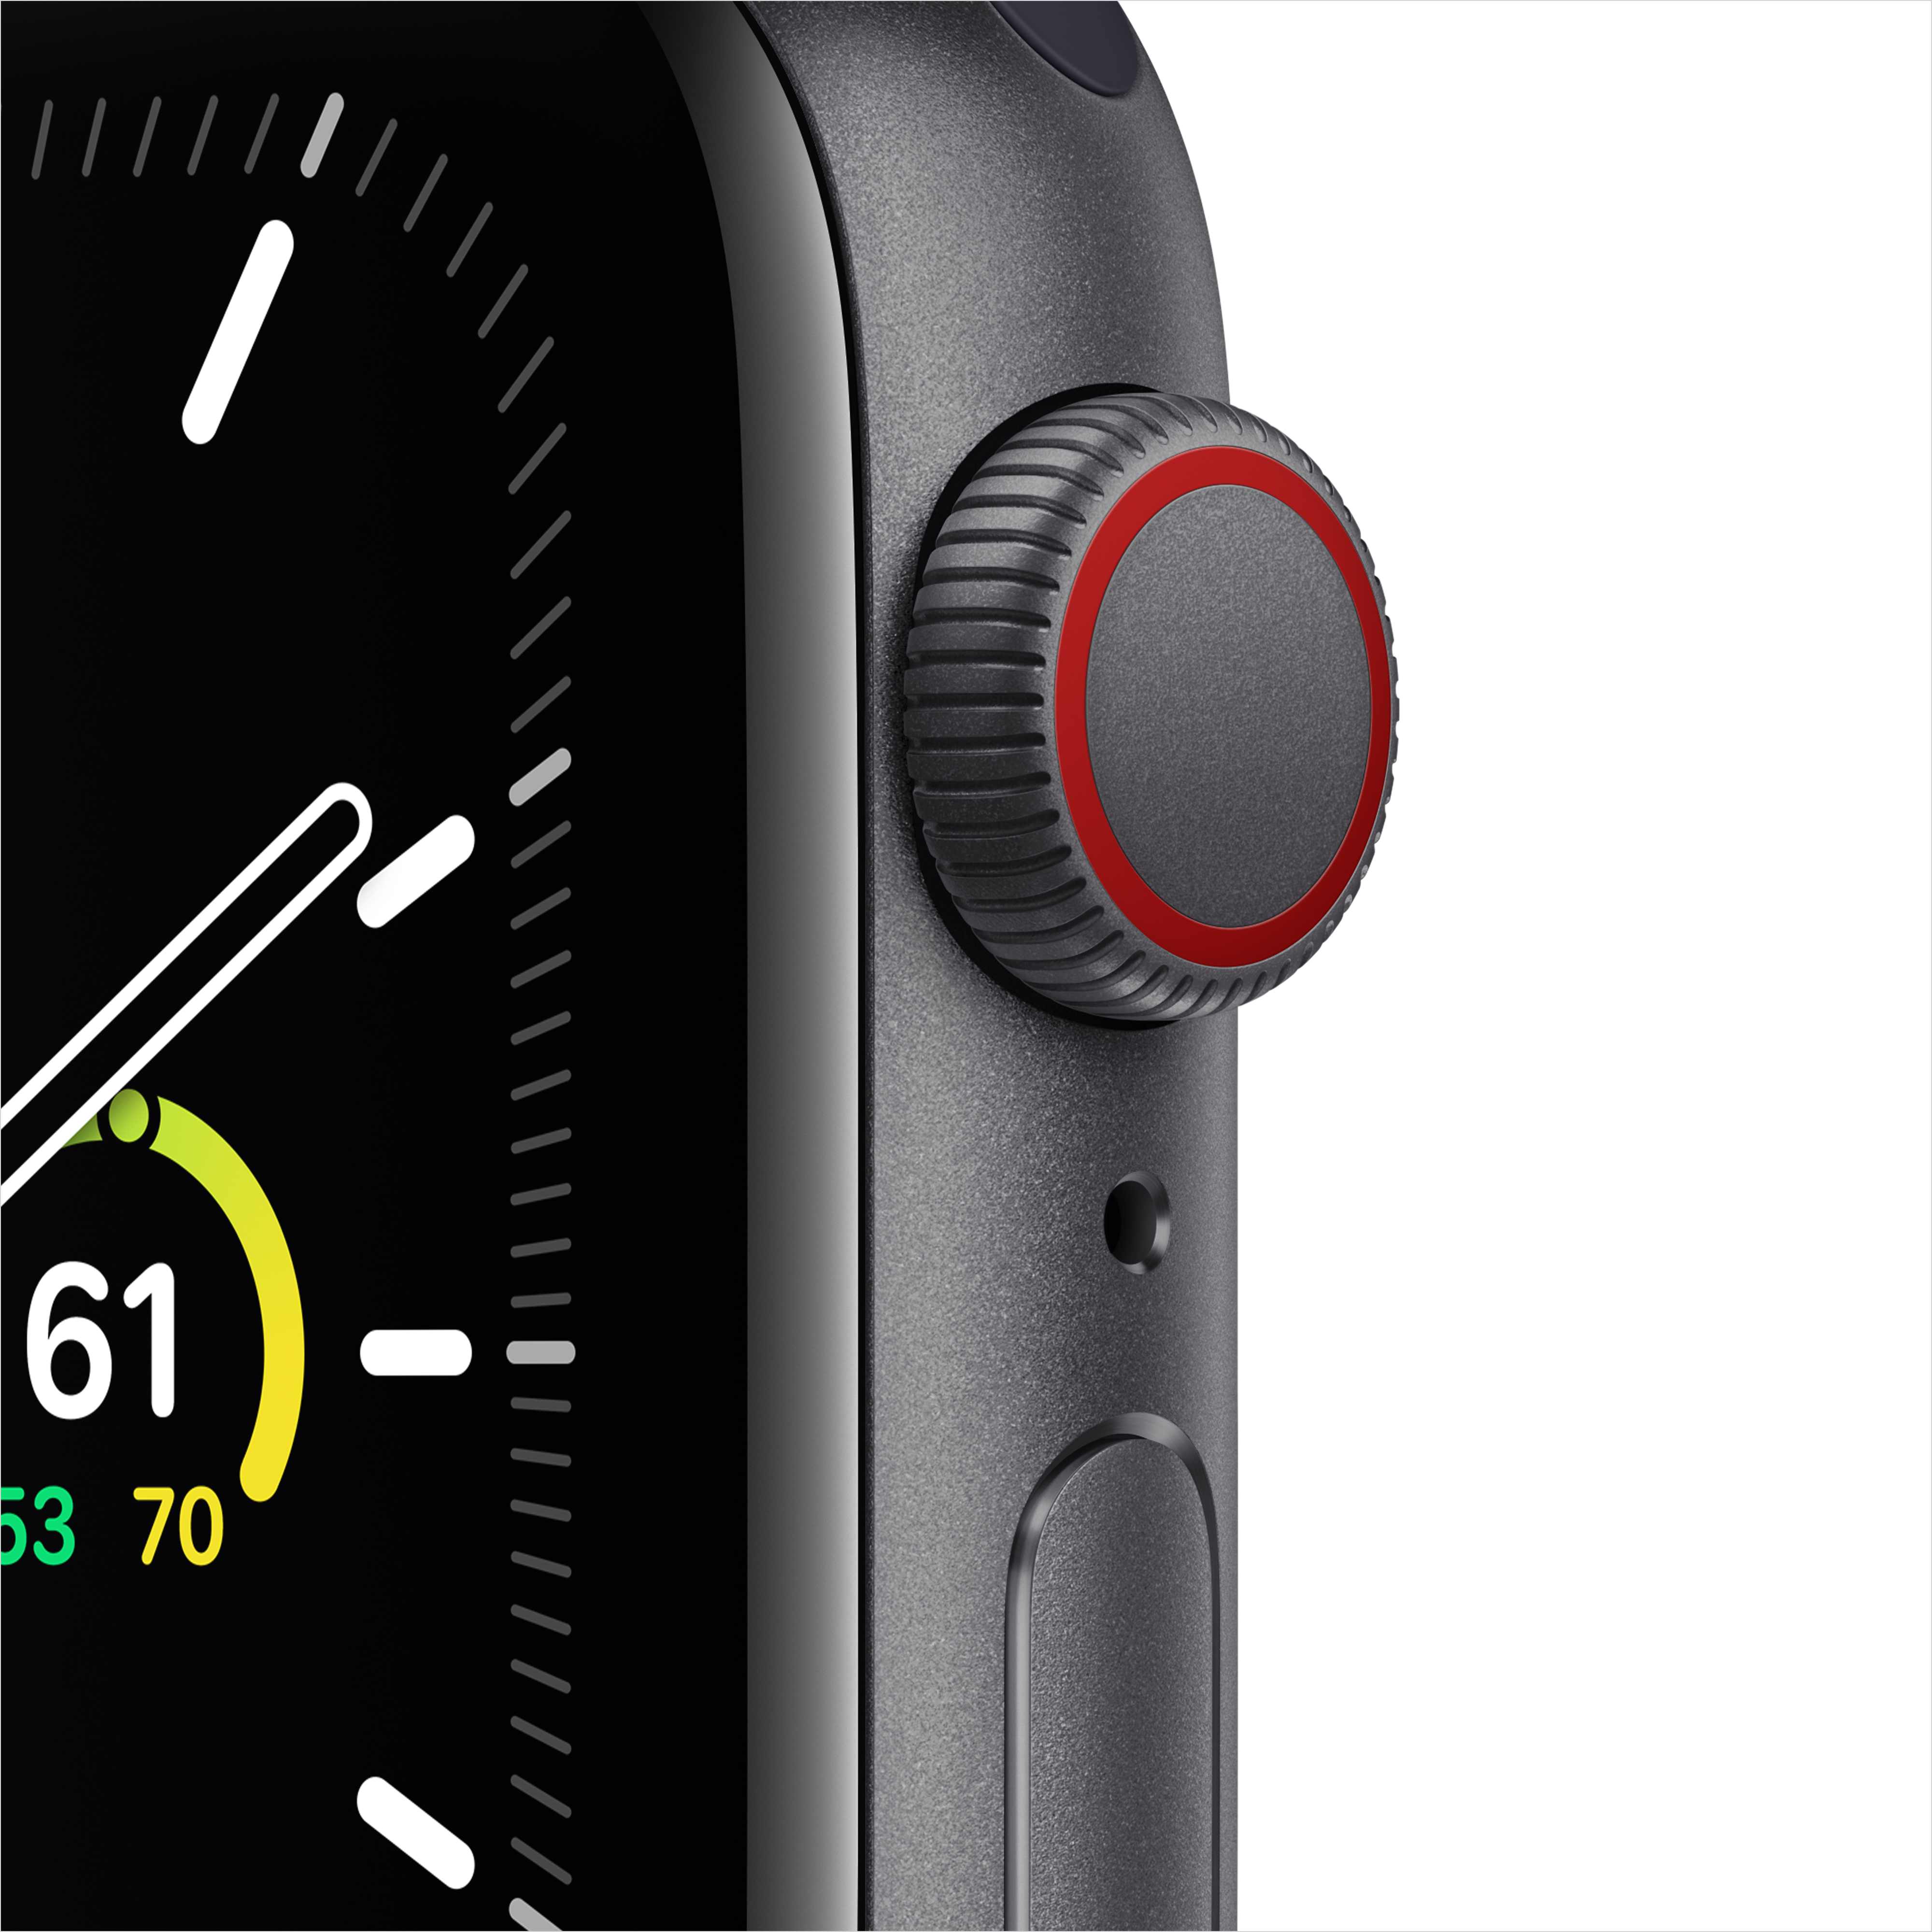 Apple Watch SE (1st Gen) GPS, 44mm Space Gray Aluminum Case with Black Sport Band - Regular - image 9 of 9